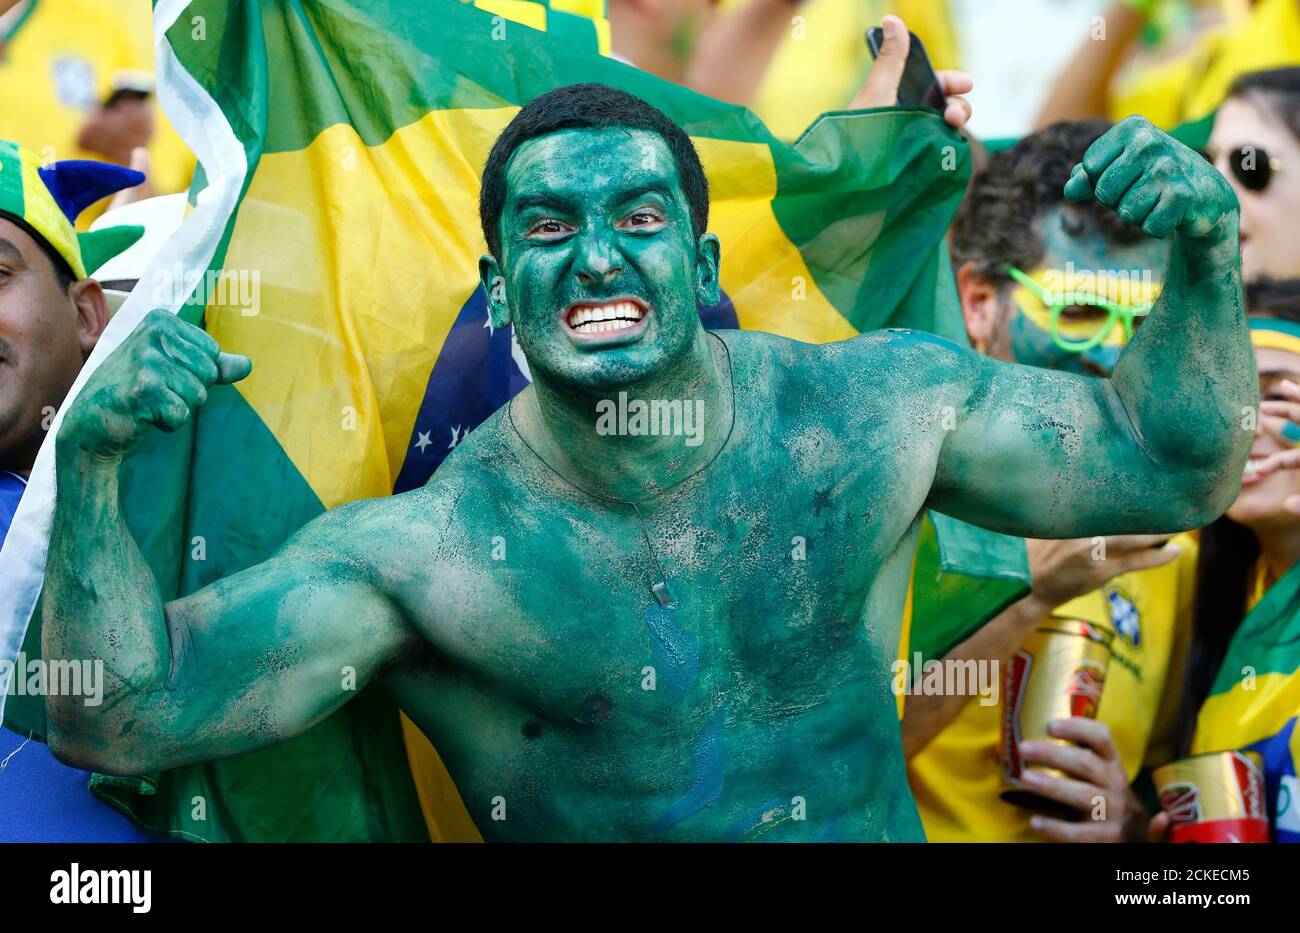 A Brazil fan poses before the 2014 World Cup quarter-finals between Brazil and Colombia at the Castelao arena in Fortaleza July 4, 2014. REUTERS/Stefano Rellandini (BRAZIL  - Tags: SOCCER SPORT WORLD CUP) Stock Photo